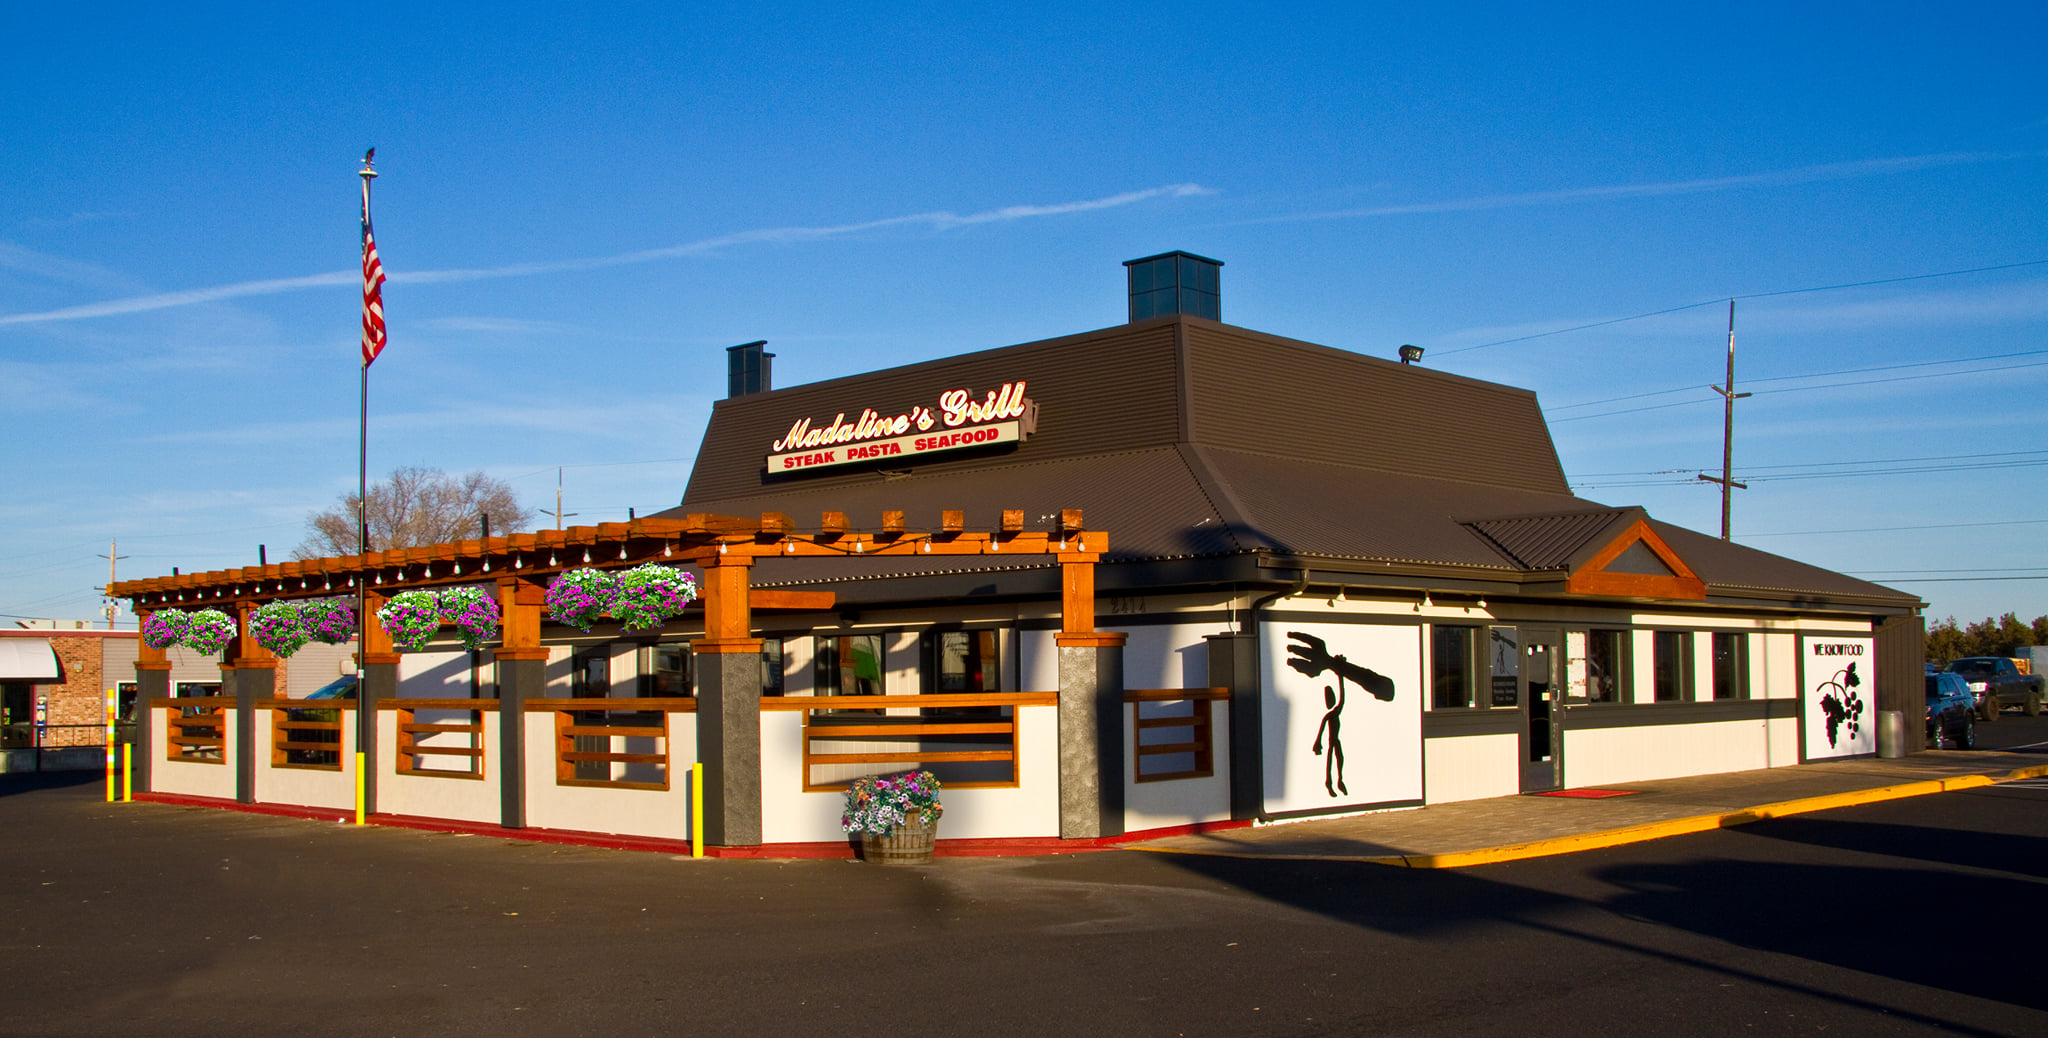 See Why Everyone’s Talking About This Oregon Steakhouse’s Unmatched Steaks and Service